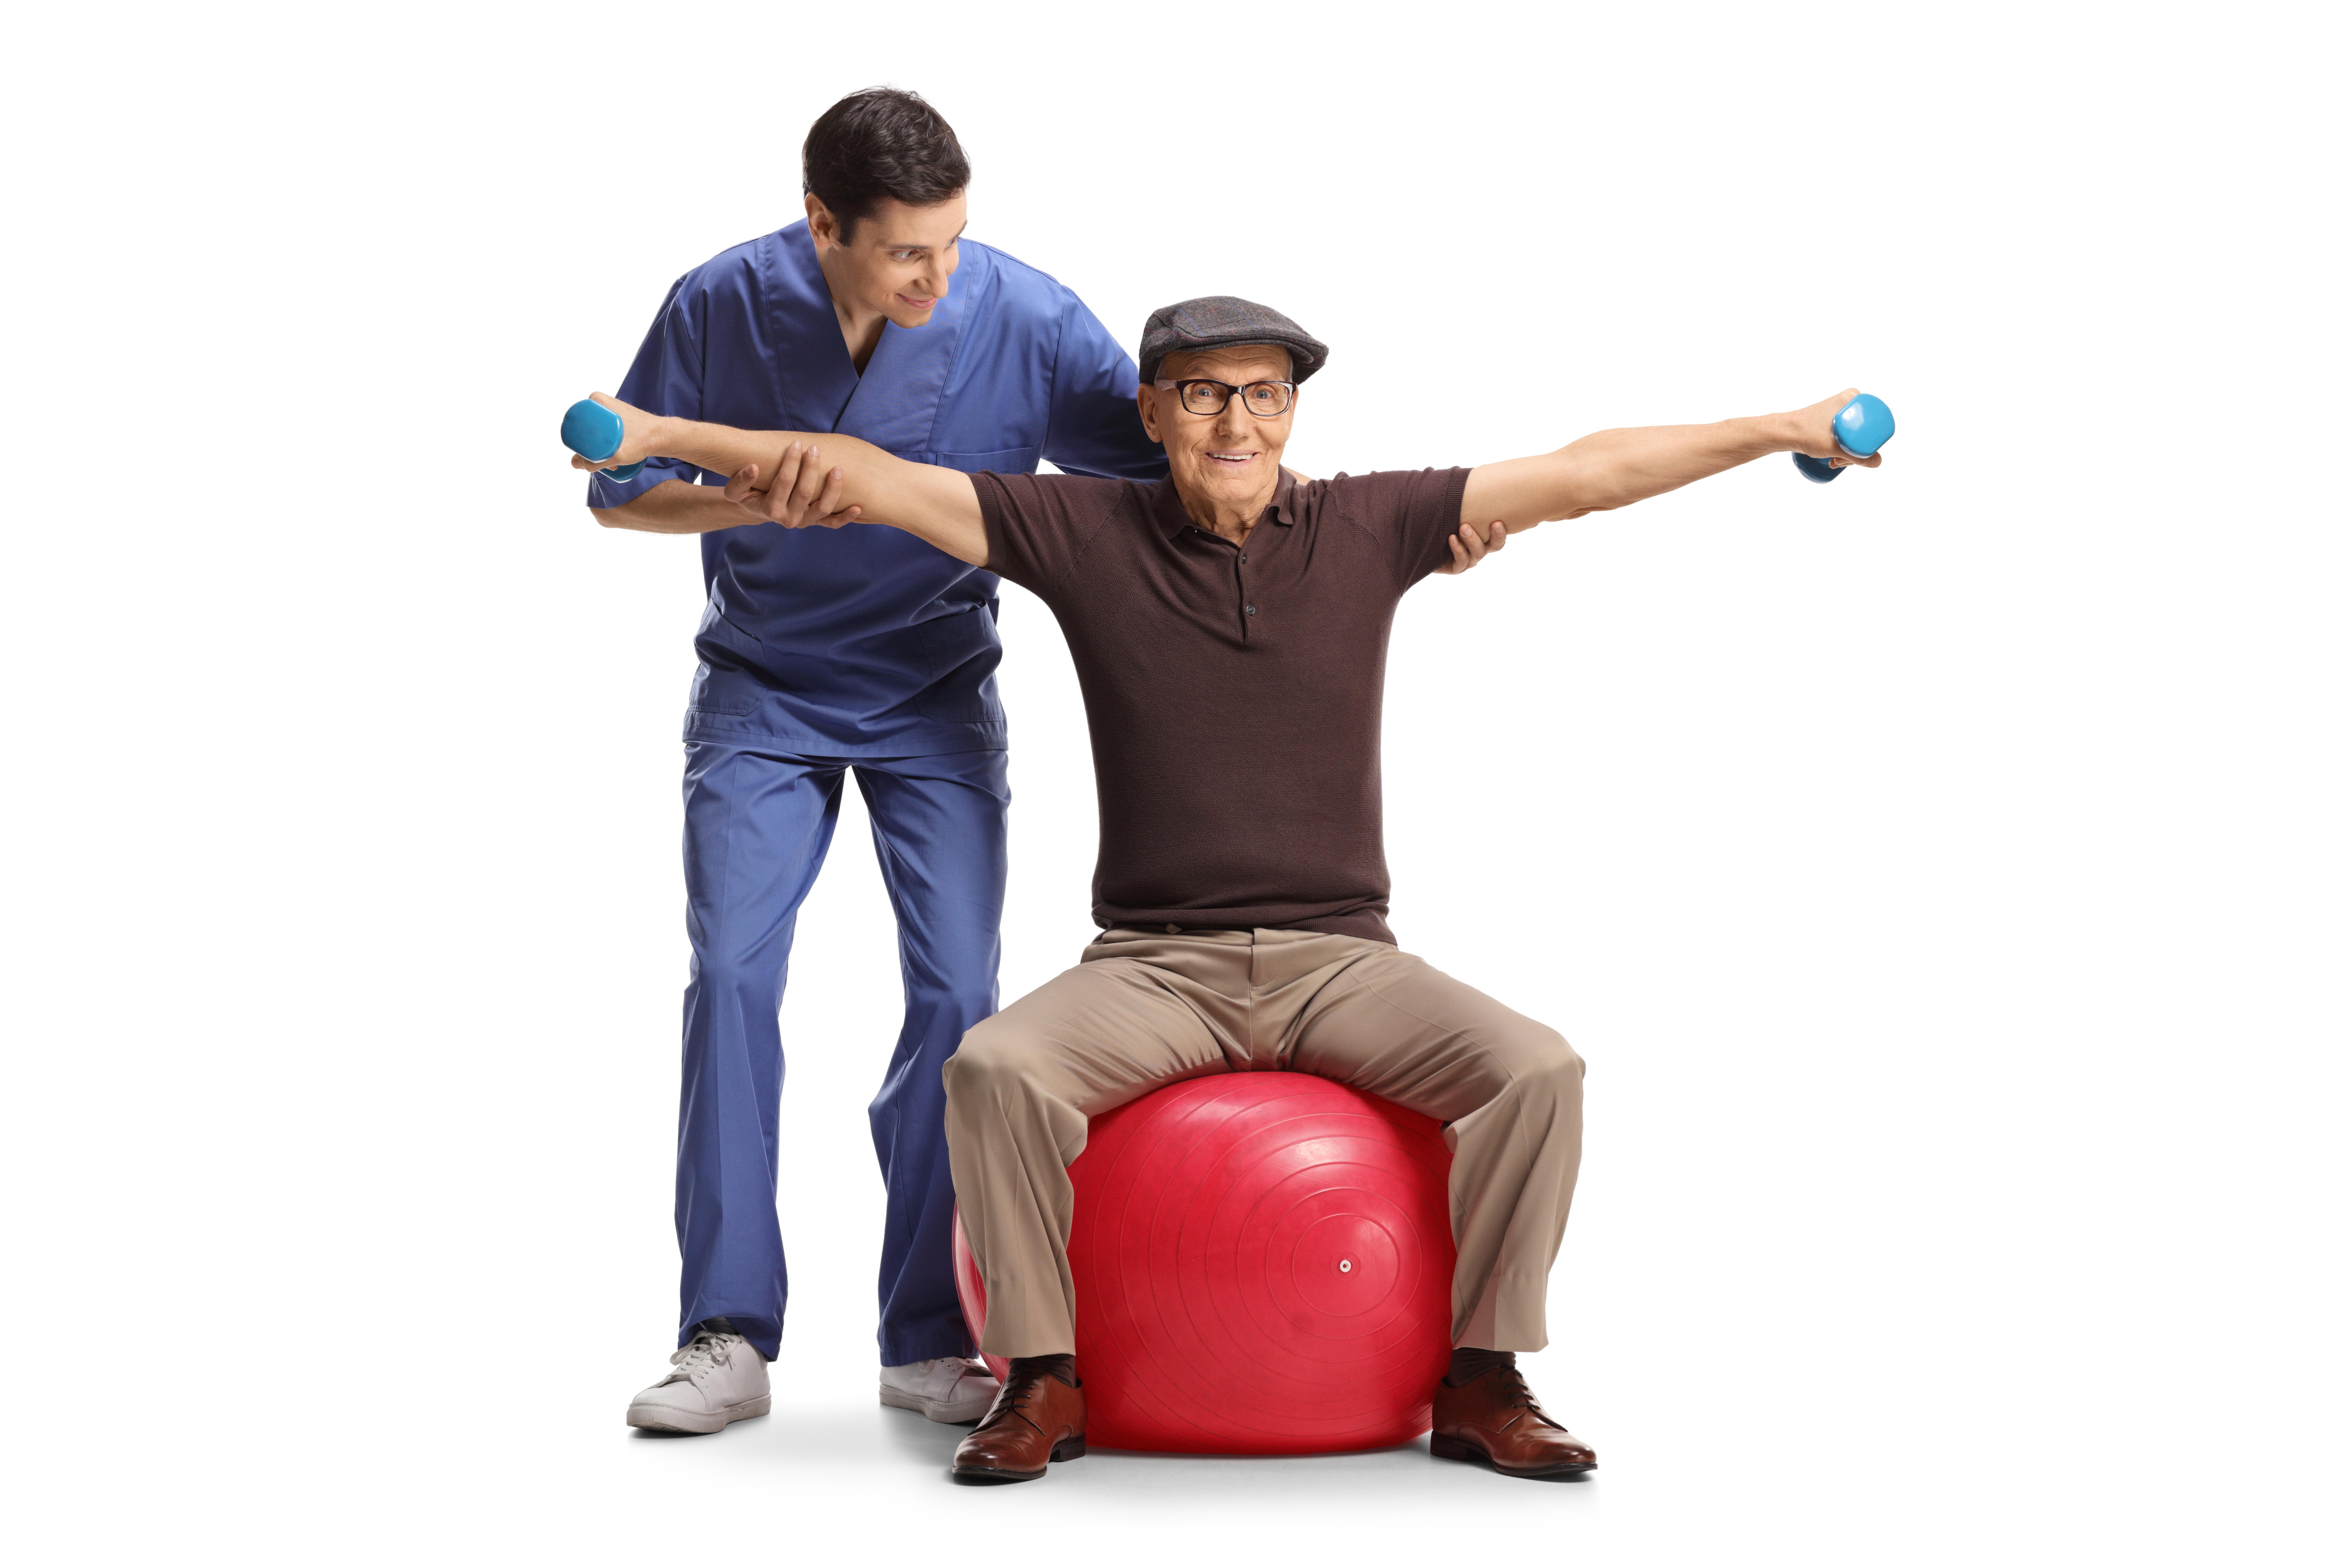 Life-saving home-based cardiac rehab coverage to end May 11th, unless Congress acts